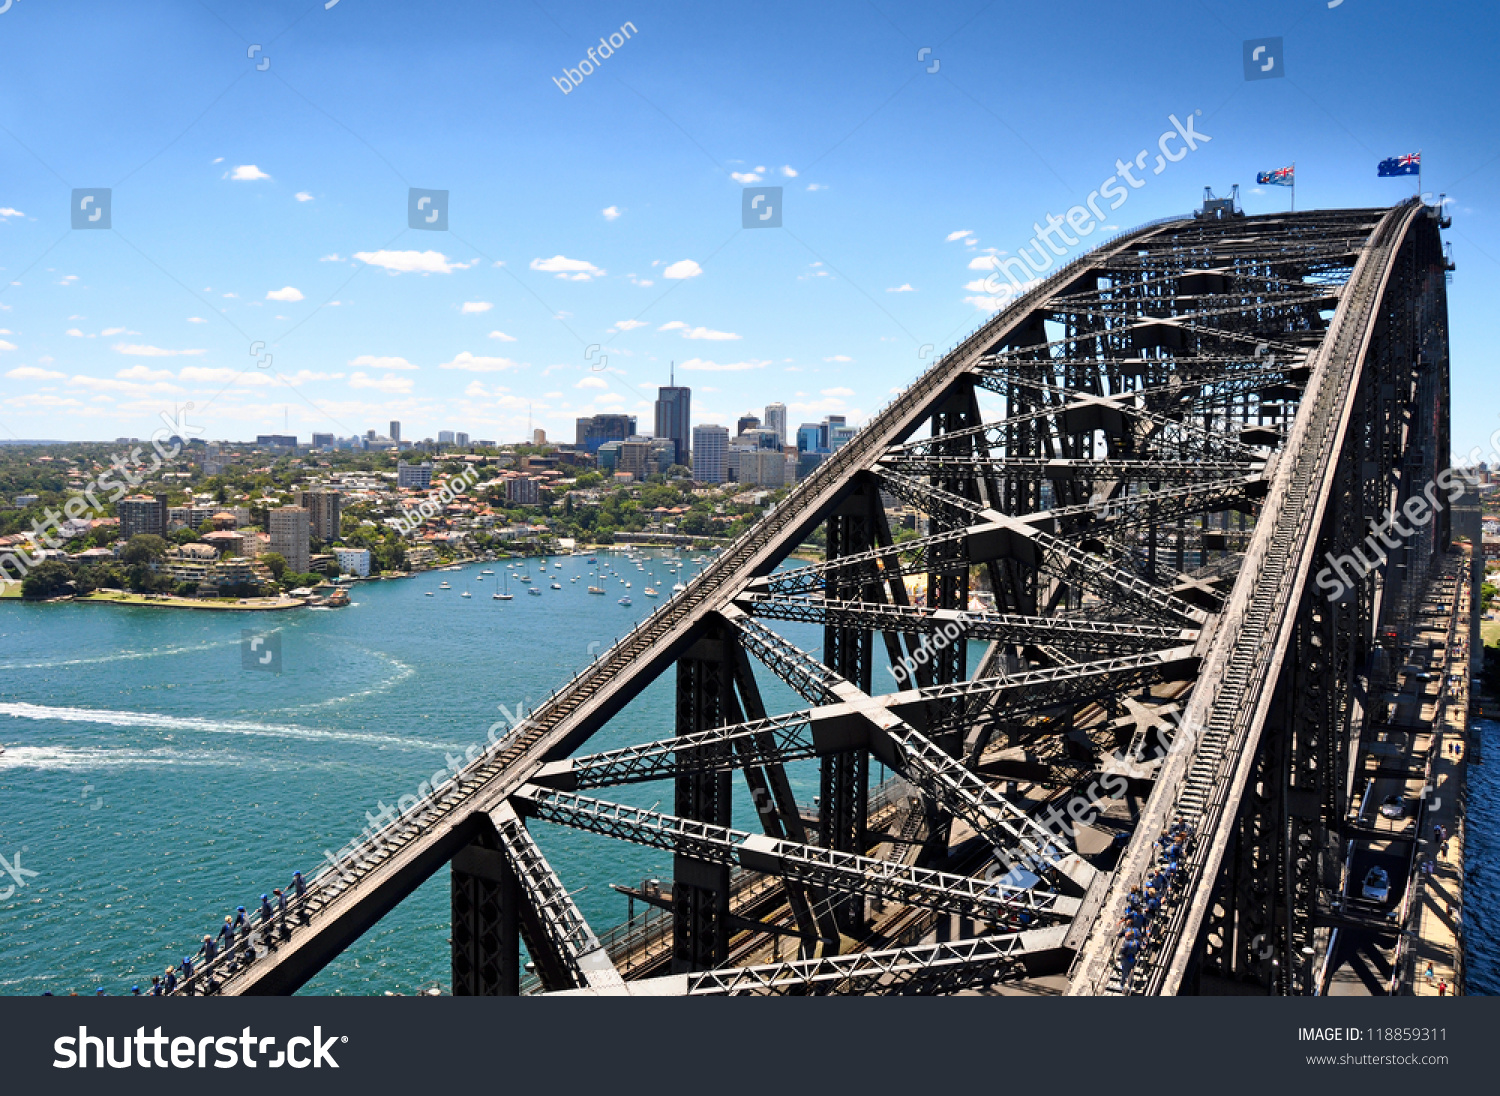 View of Sydney Harbour Bridge from the south-eastern pylon containing the tourist lookout towards North Sydney #118859311